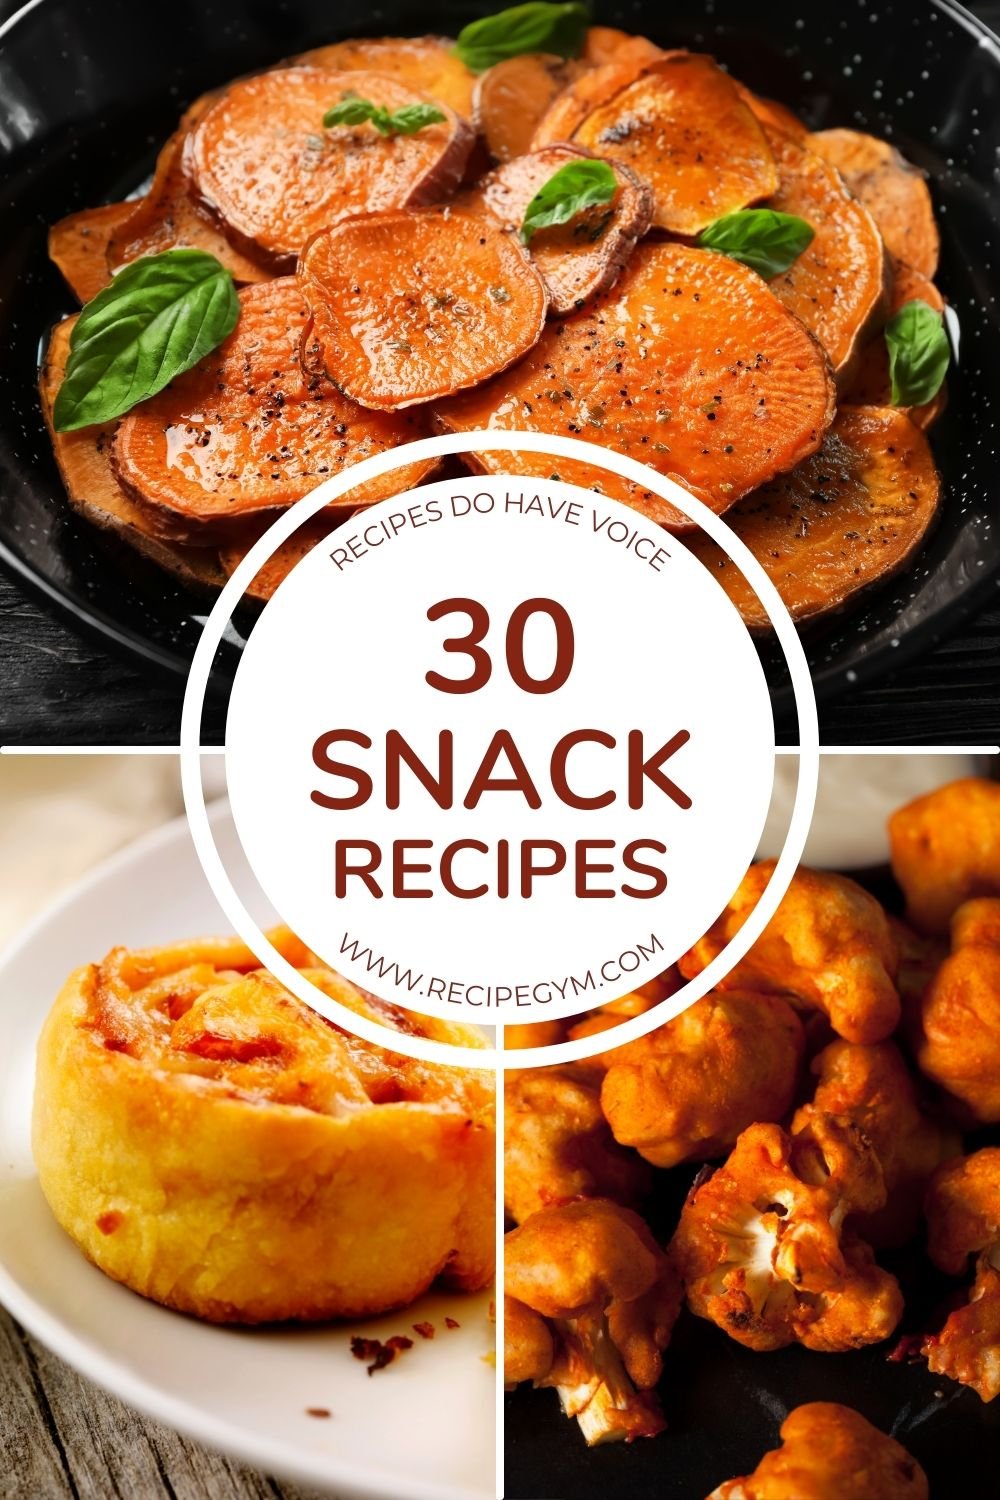 30 healthy snack recipes to try at home